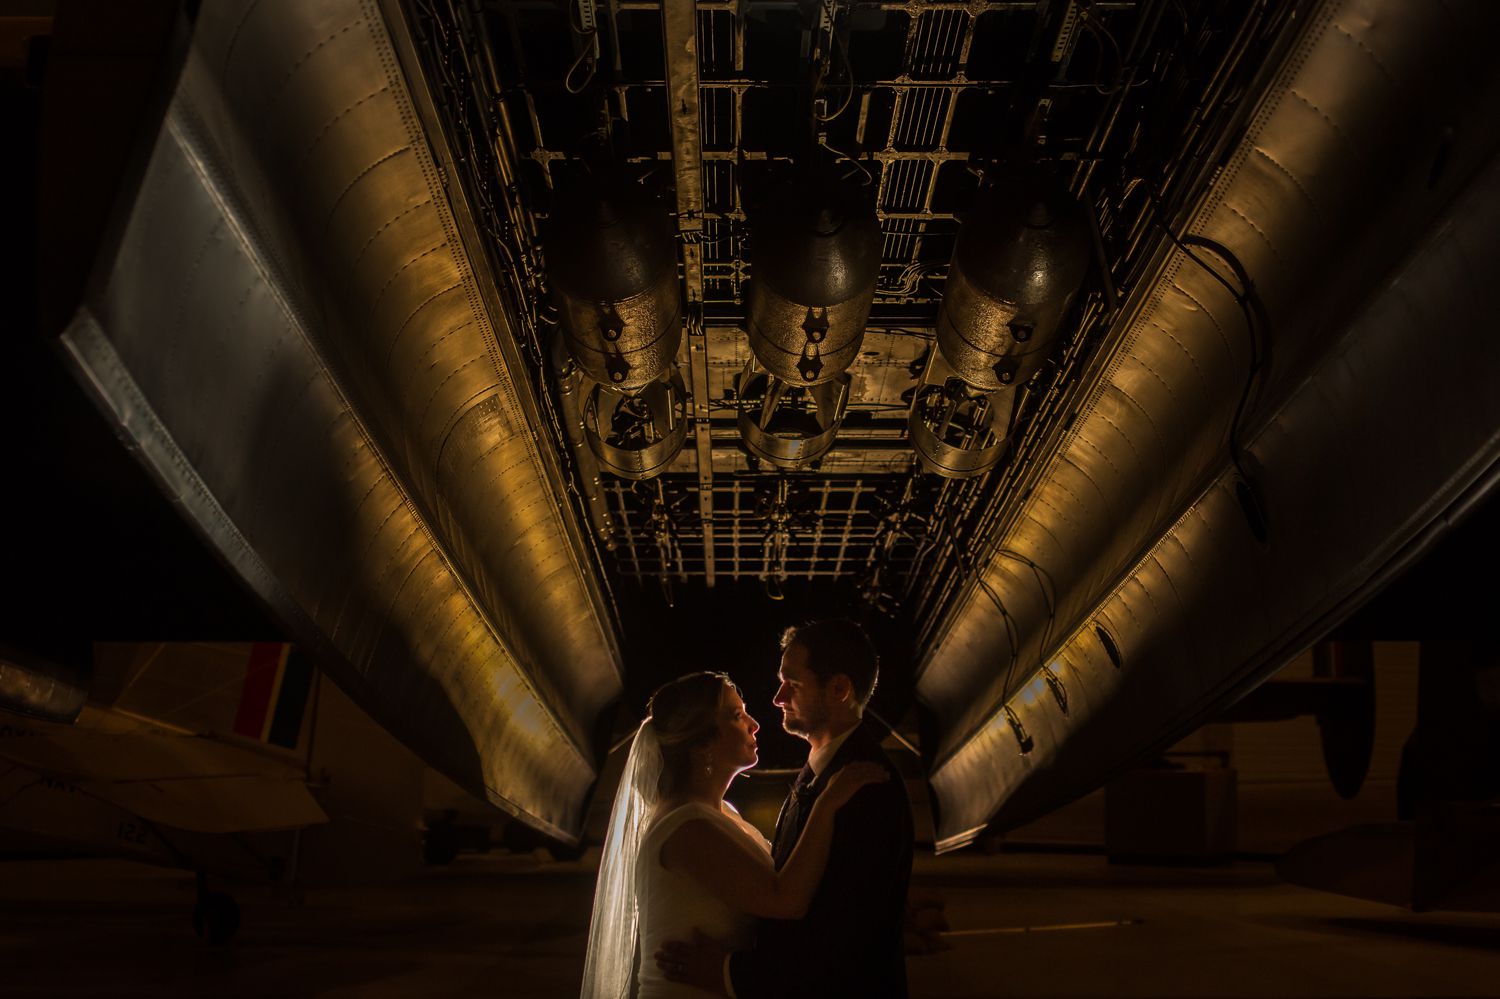 A night time portrait of the bride and groom taken inside the Canadian Aviation and Space Museum in downtown Ottawa